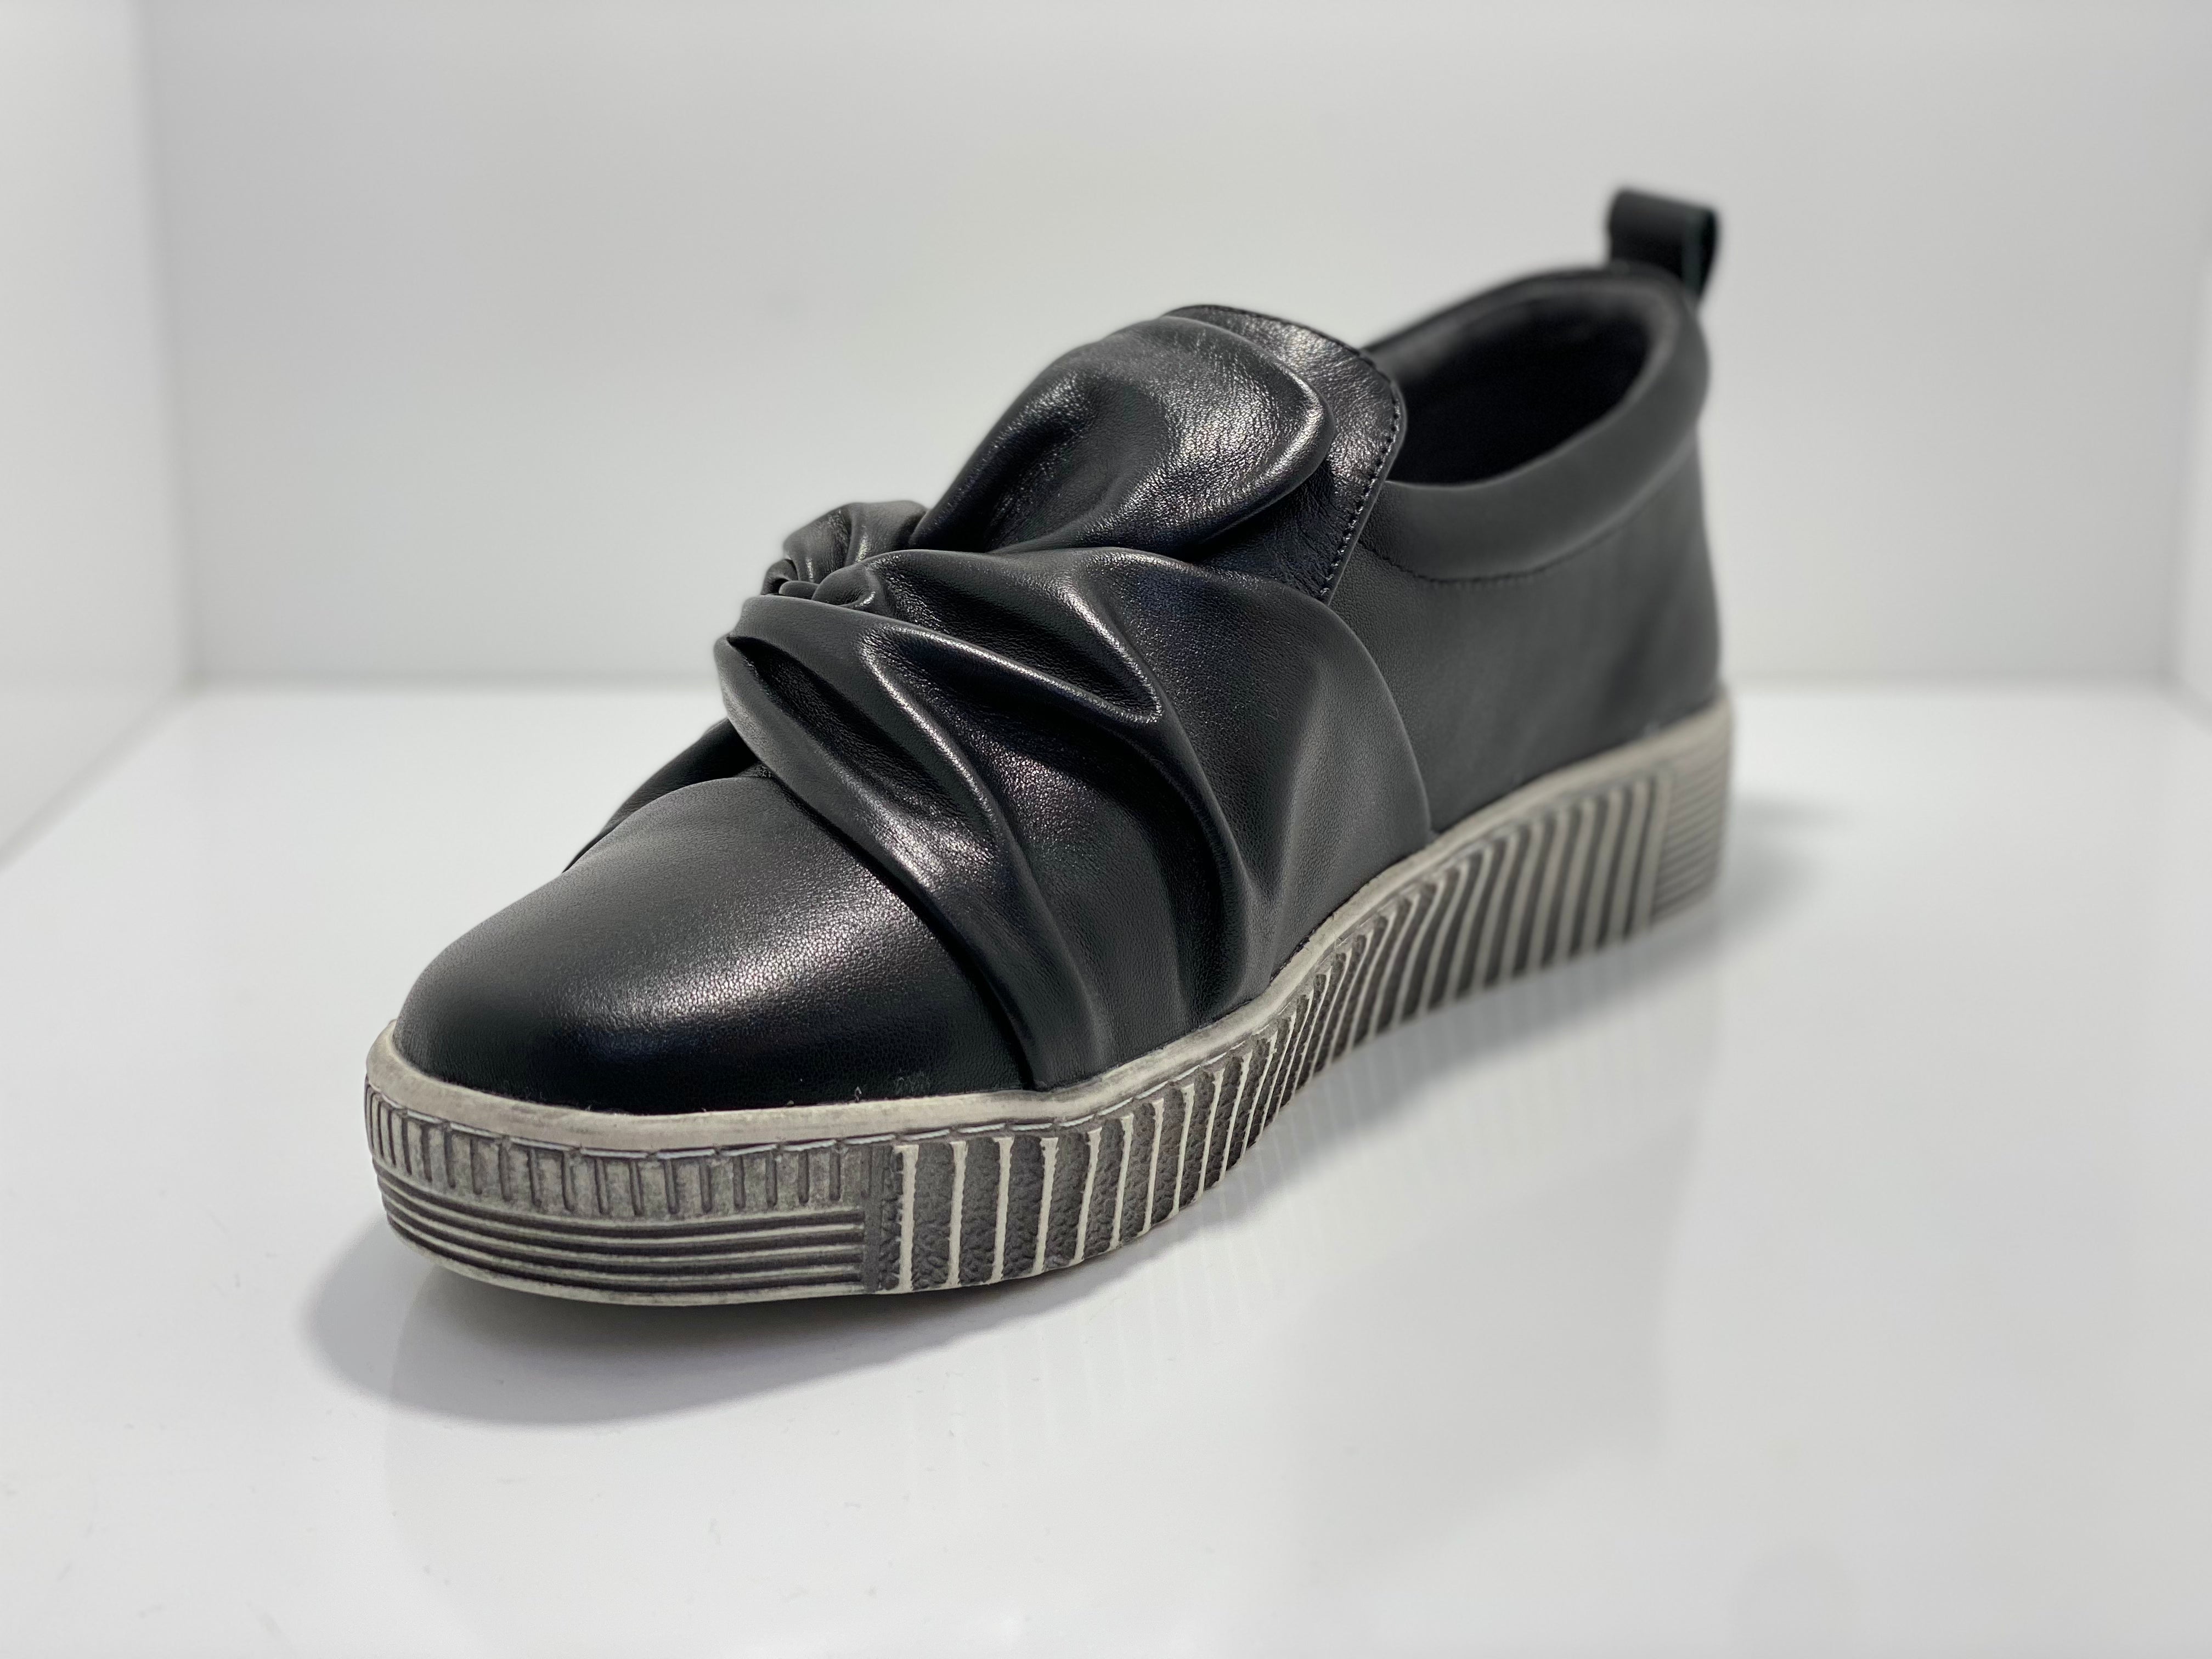 Bowie Knot Slip On Leather Shoe Hinako